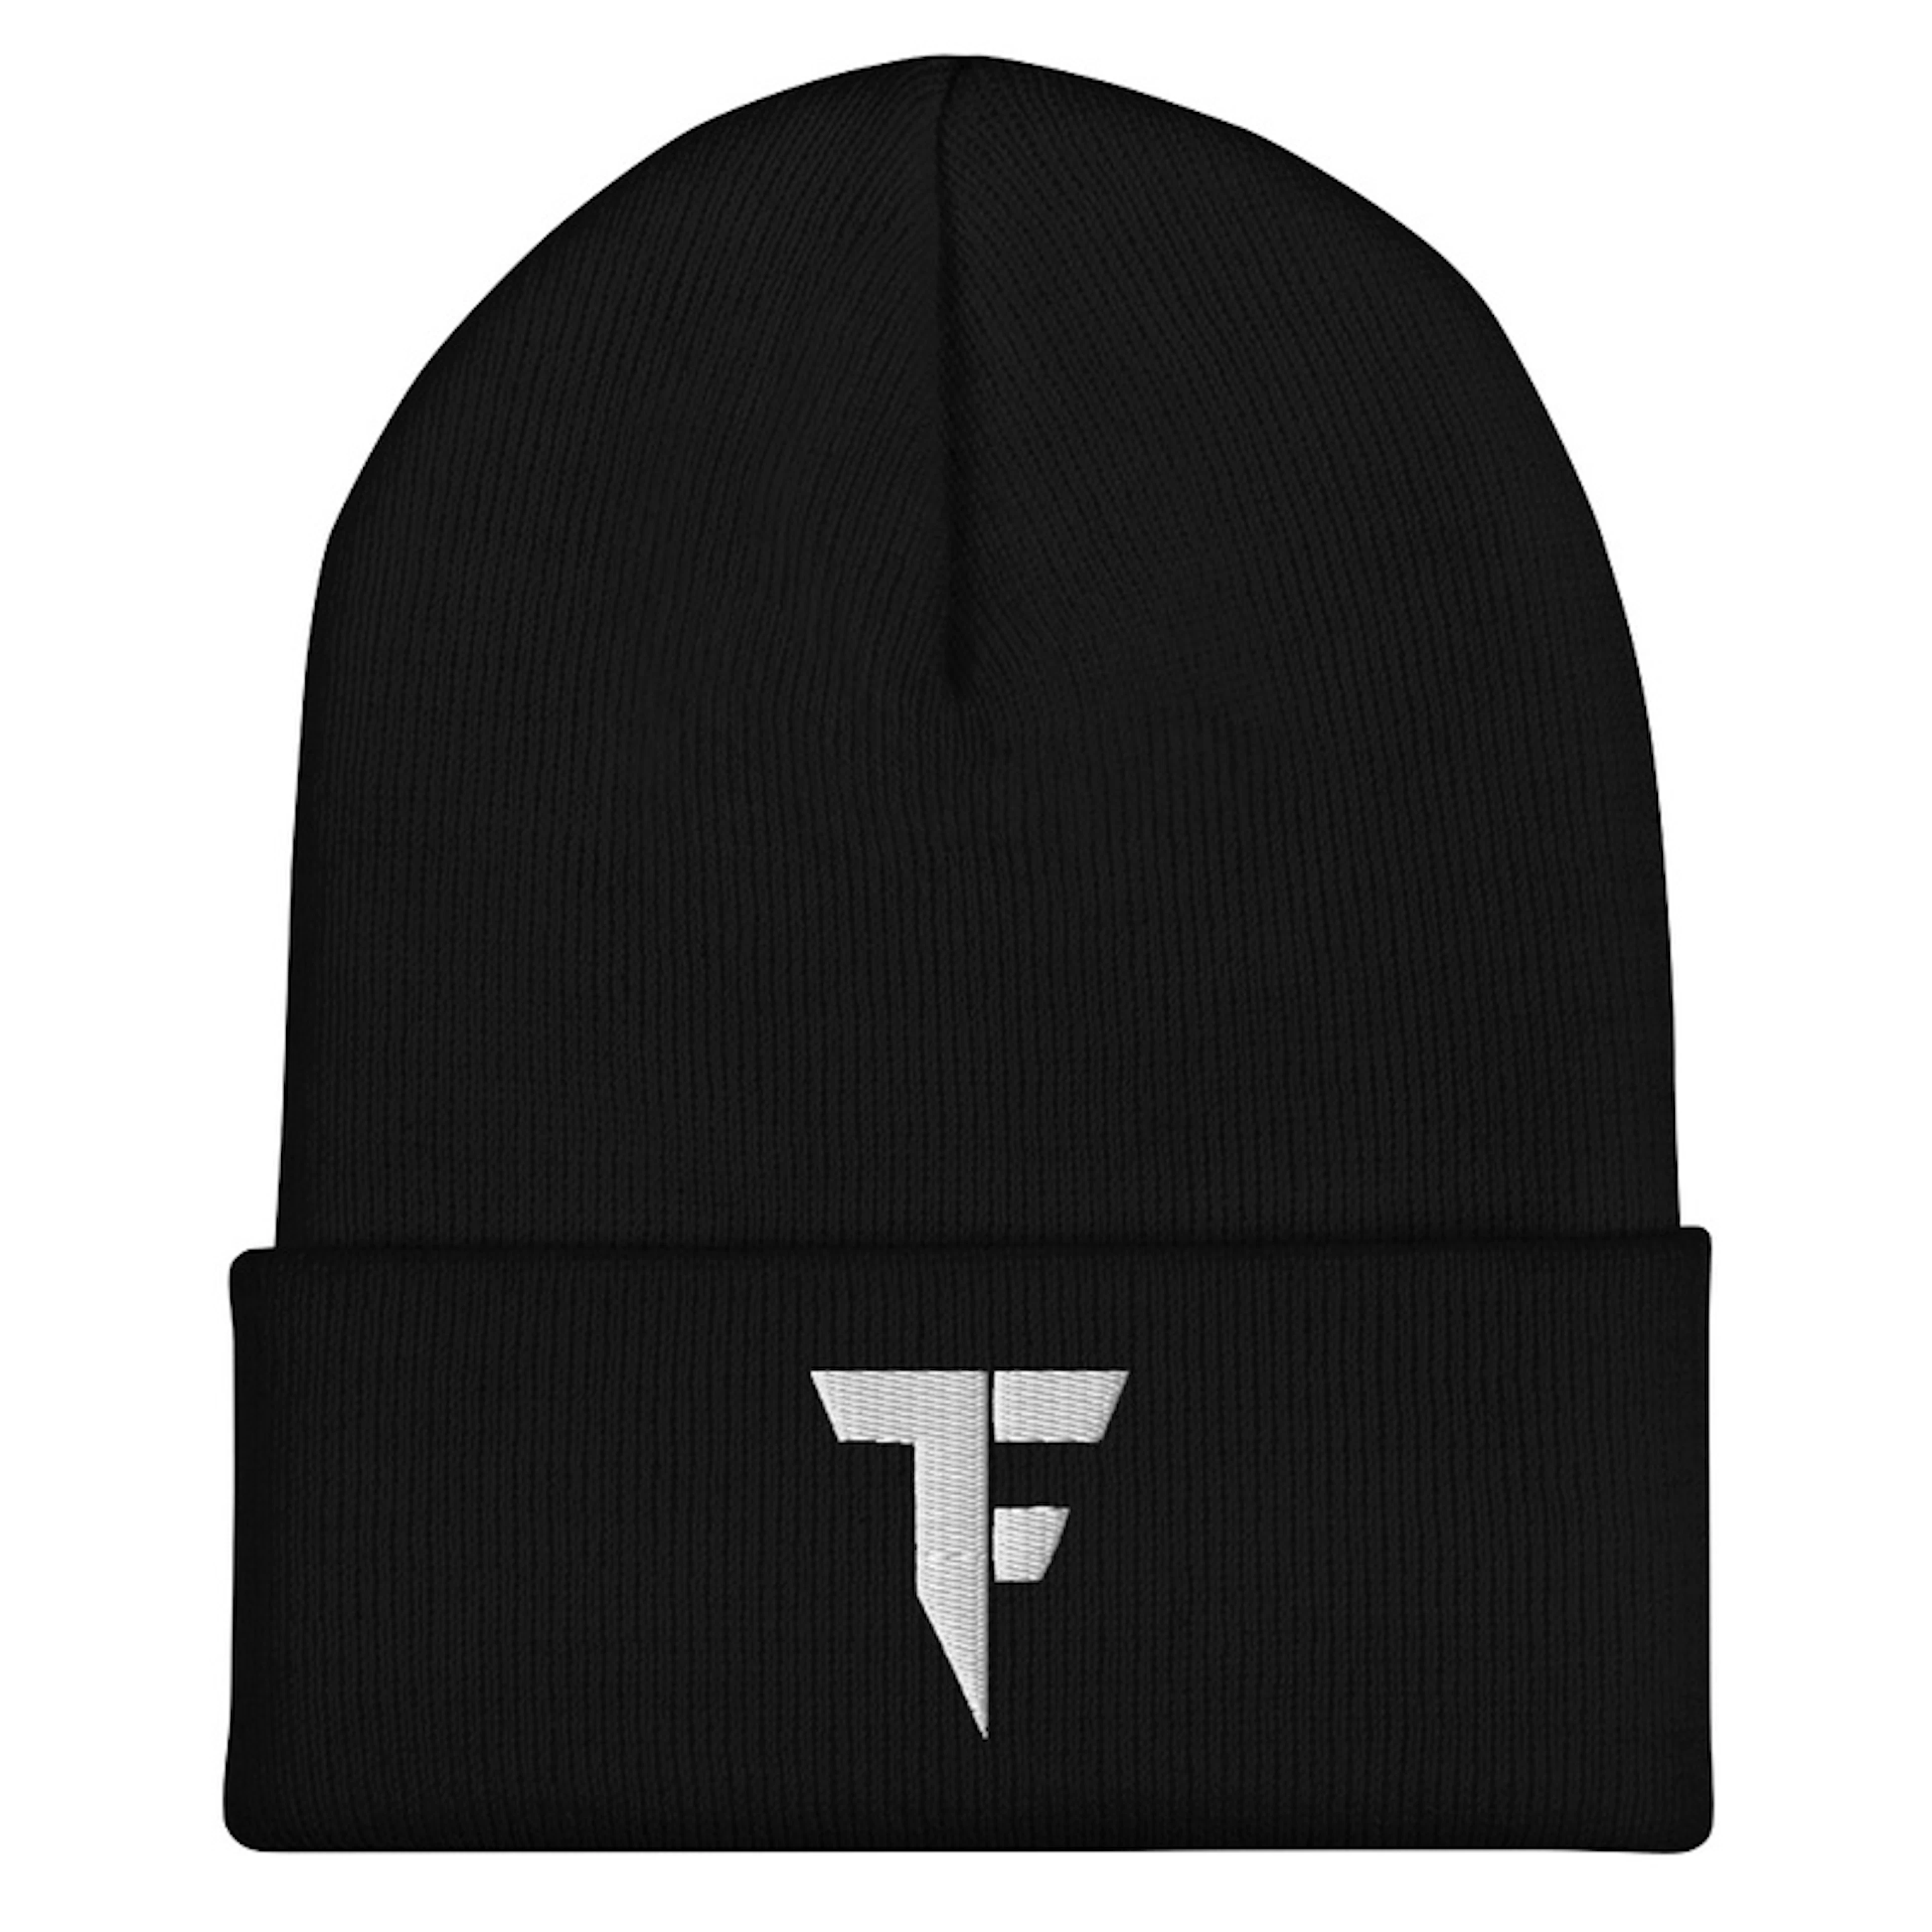 T-FALCON OFFICIAL TF LOGO BEANIE HAT